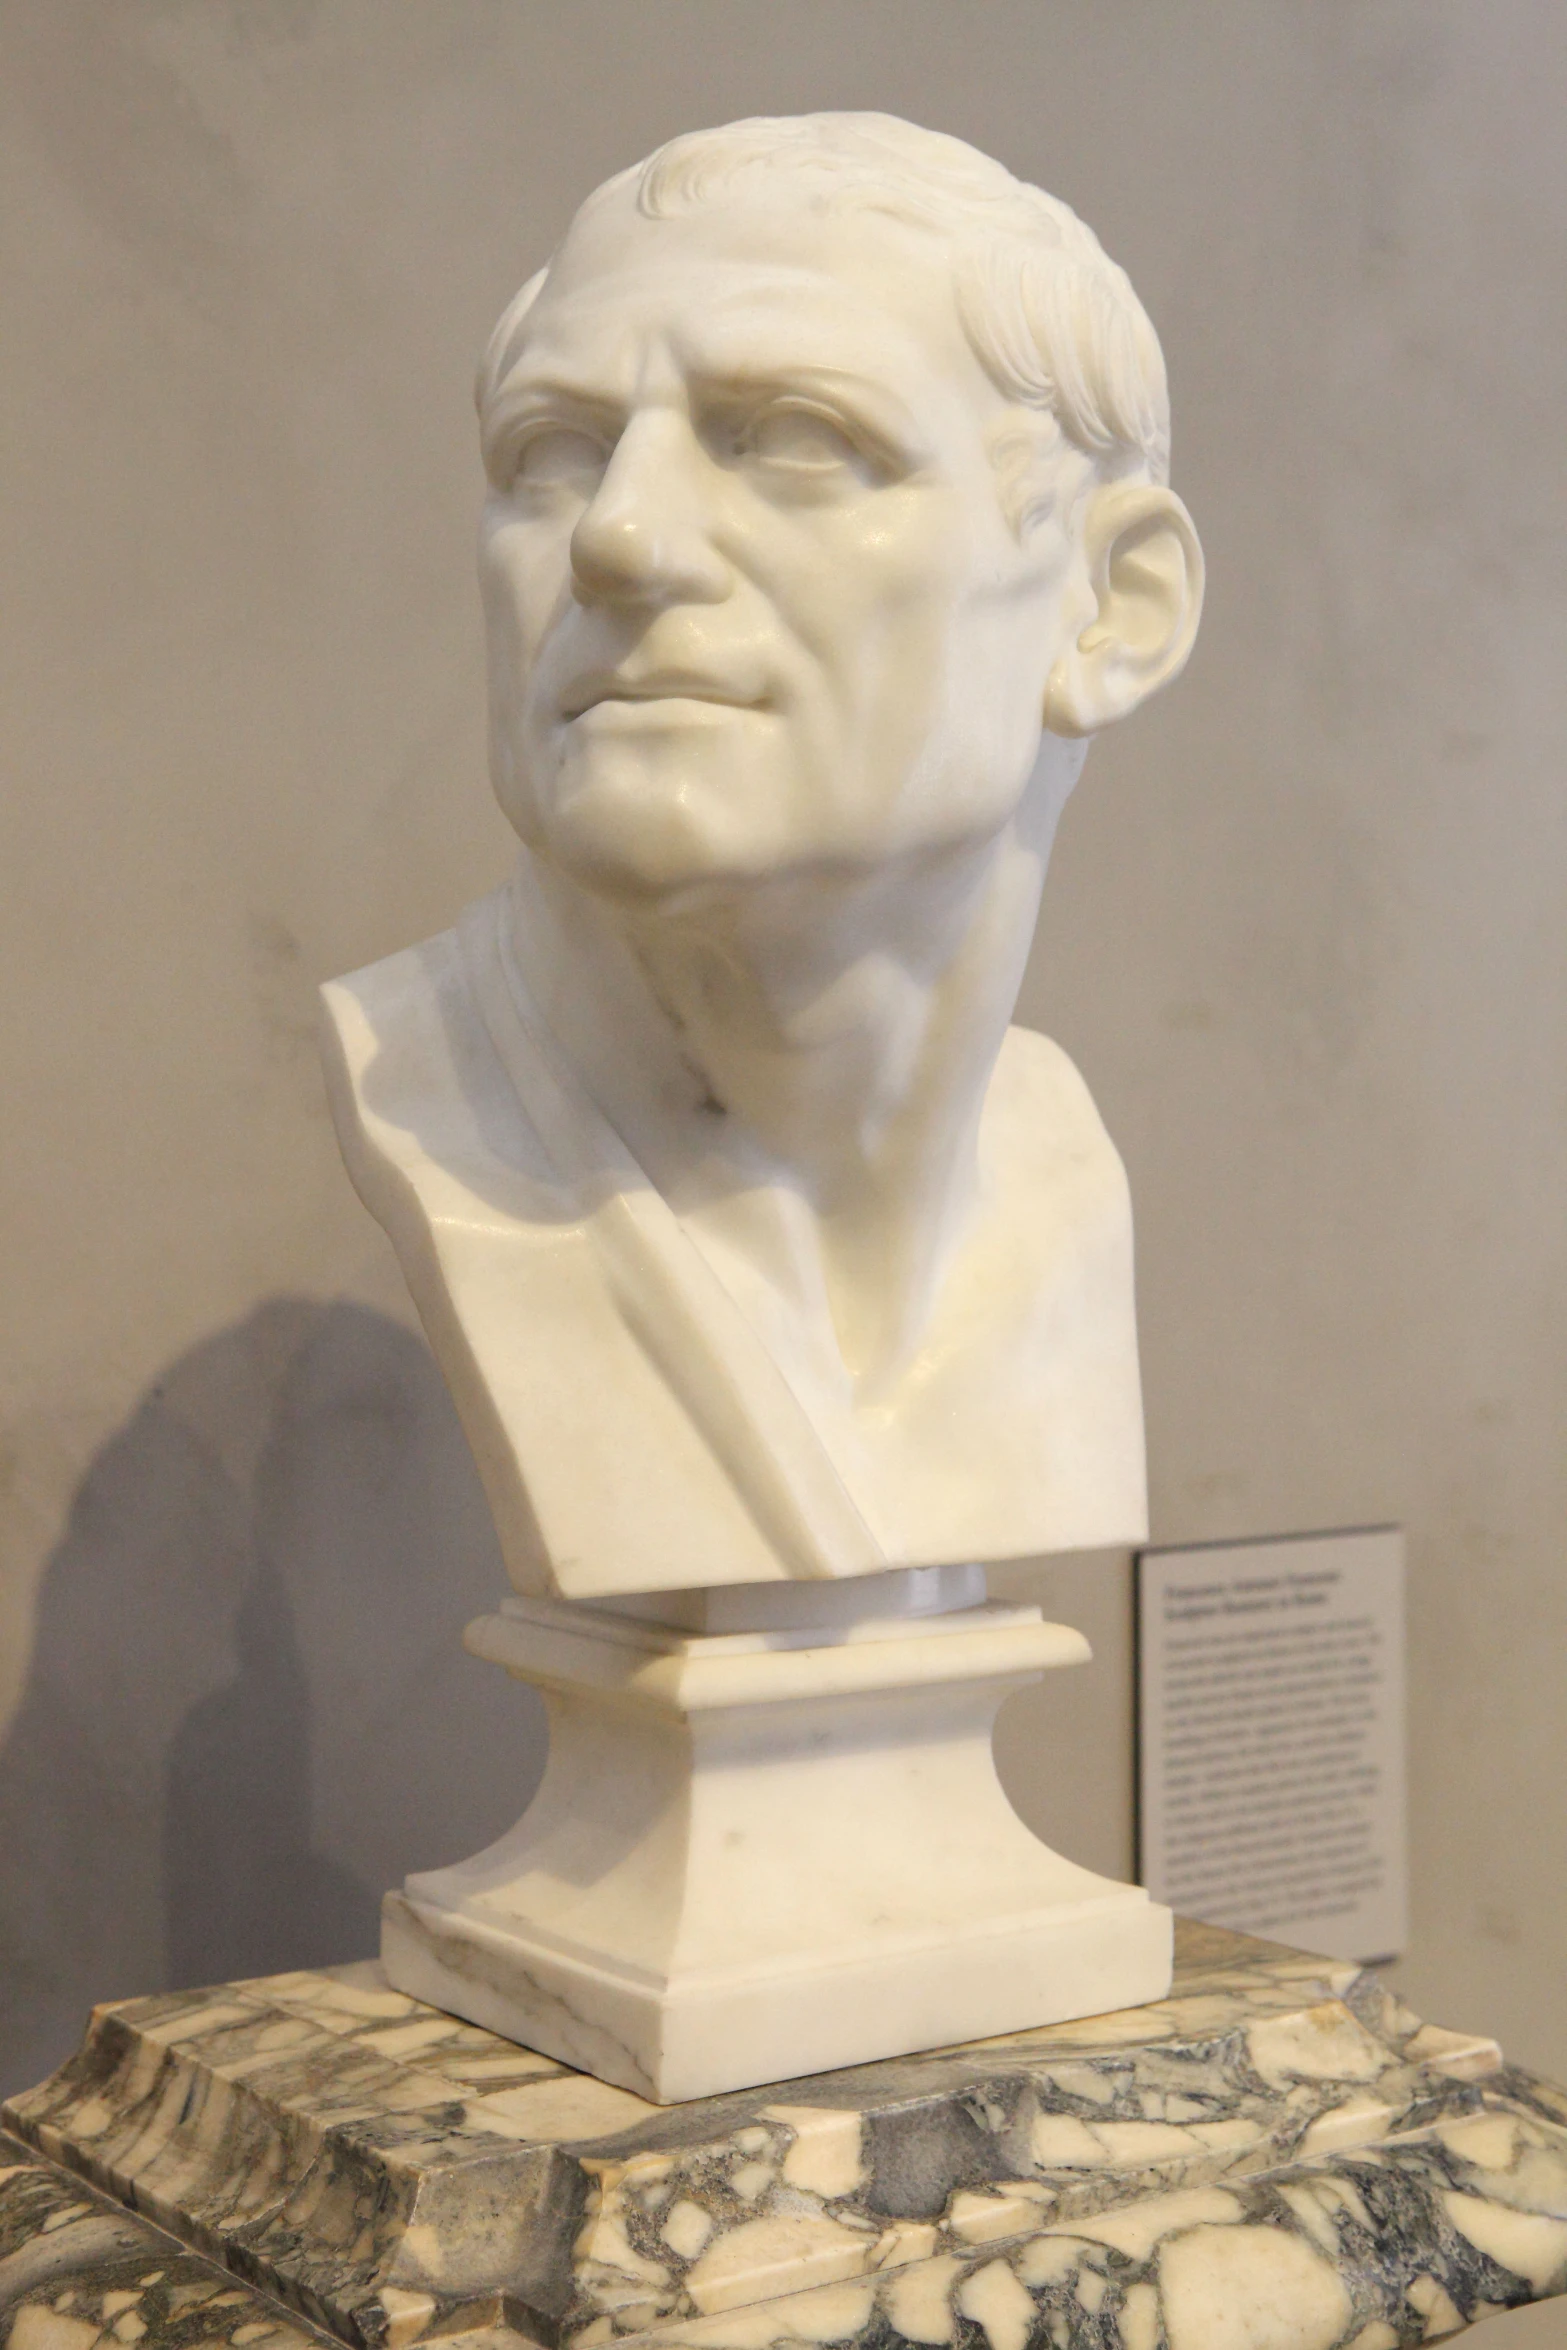 there is a bust of aham lincoln next to some sculptures